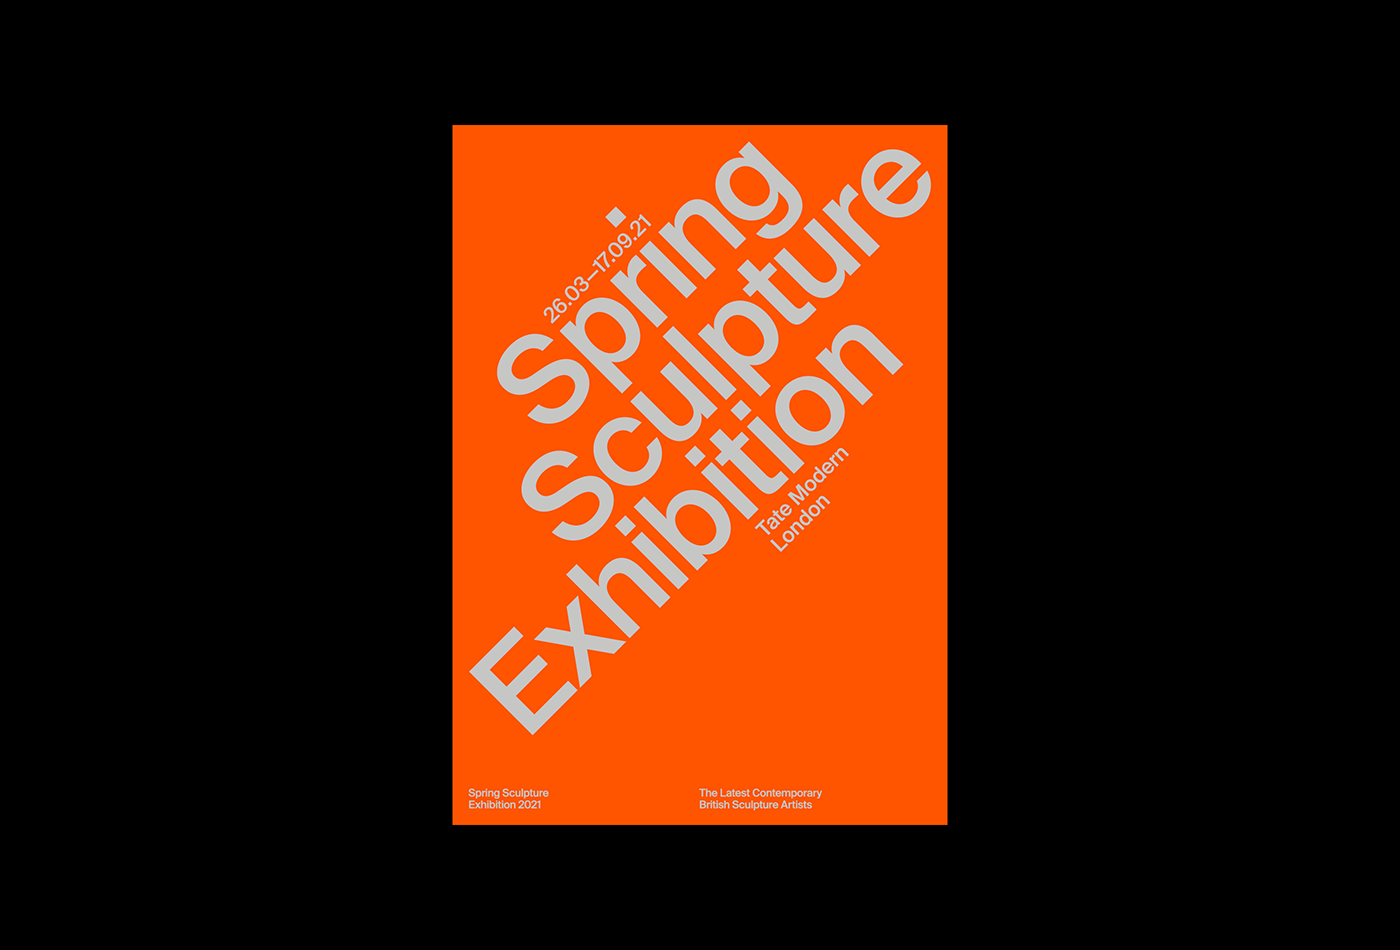 poster type typography   print editorial posters design typographic graphic swiss